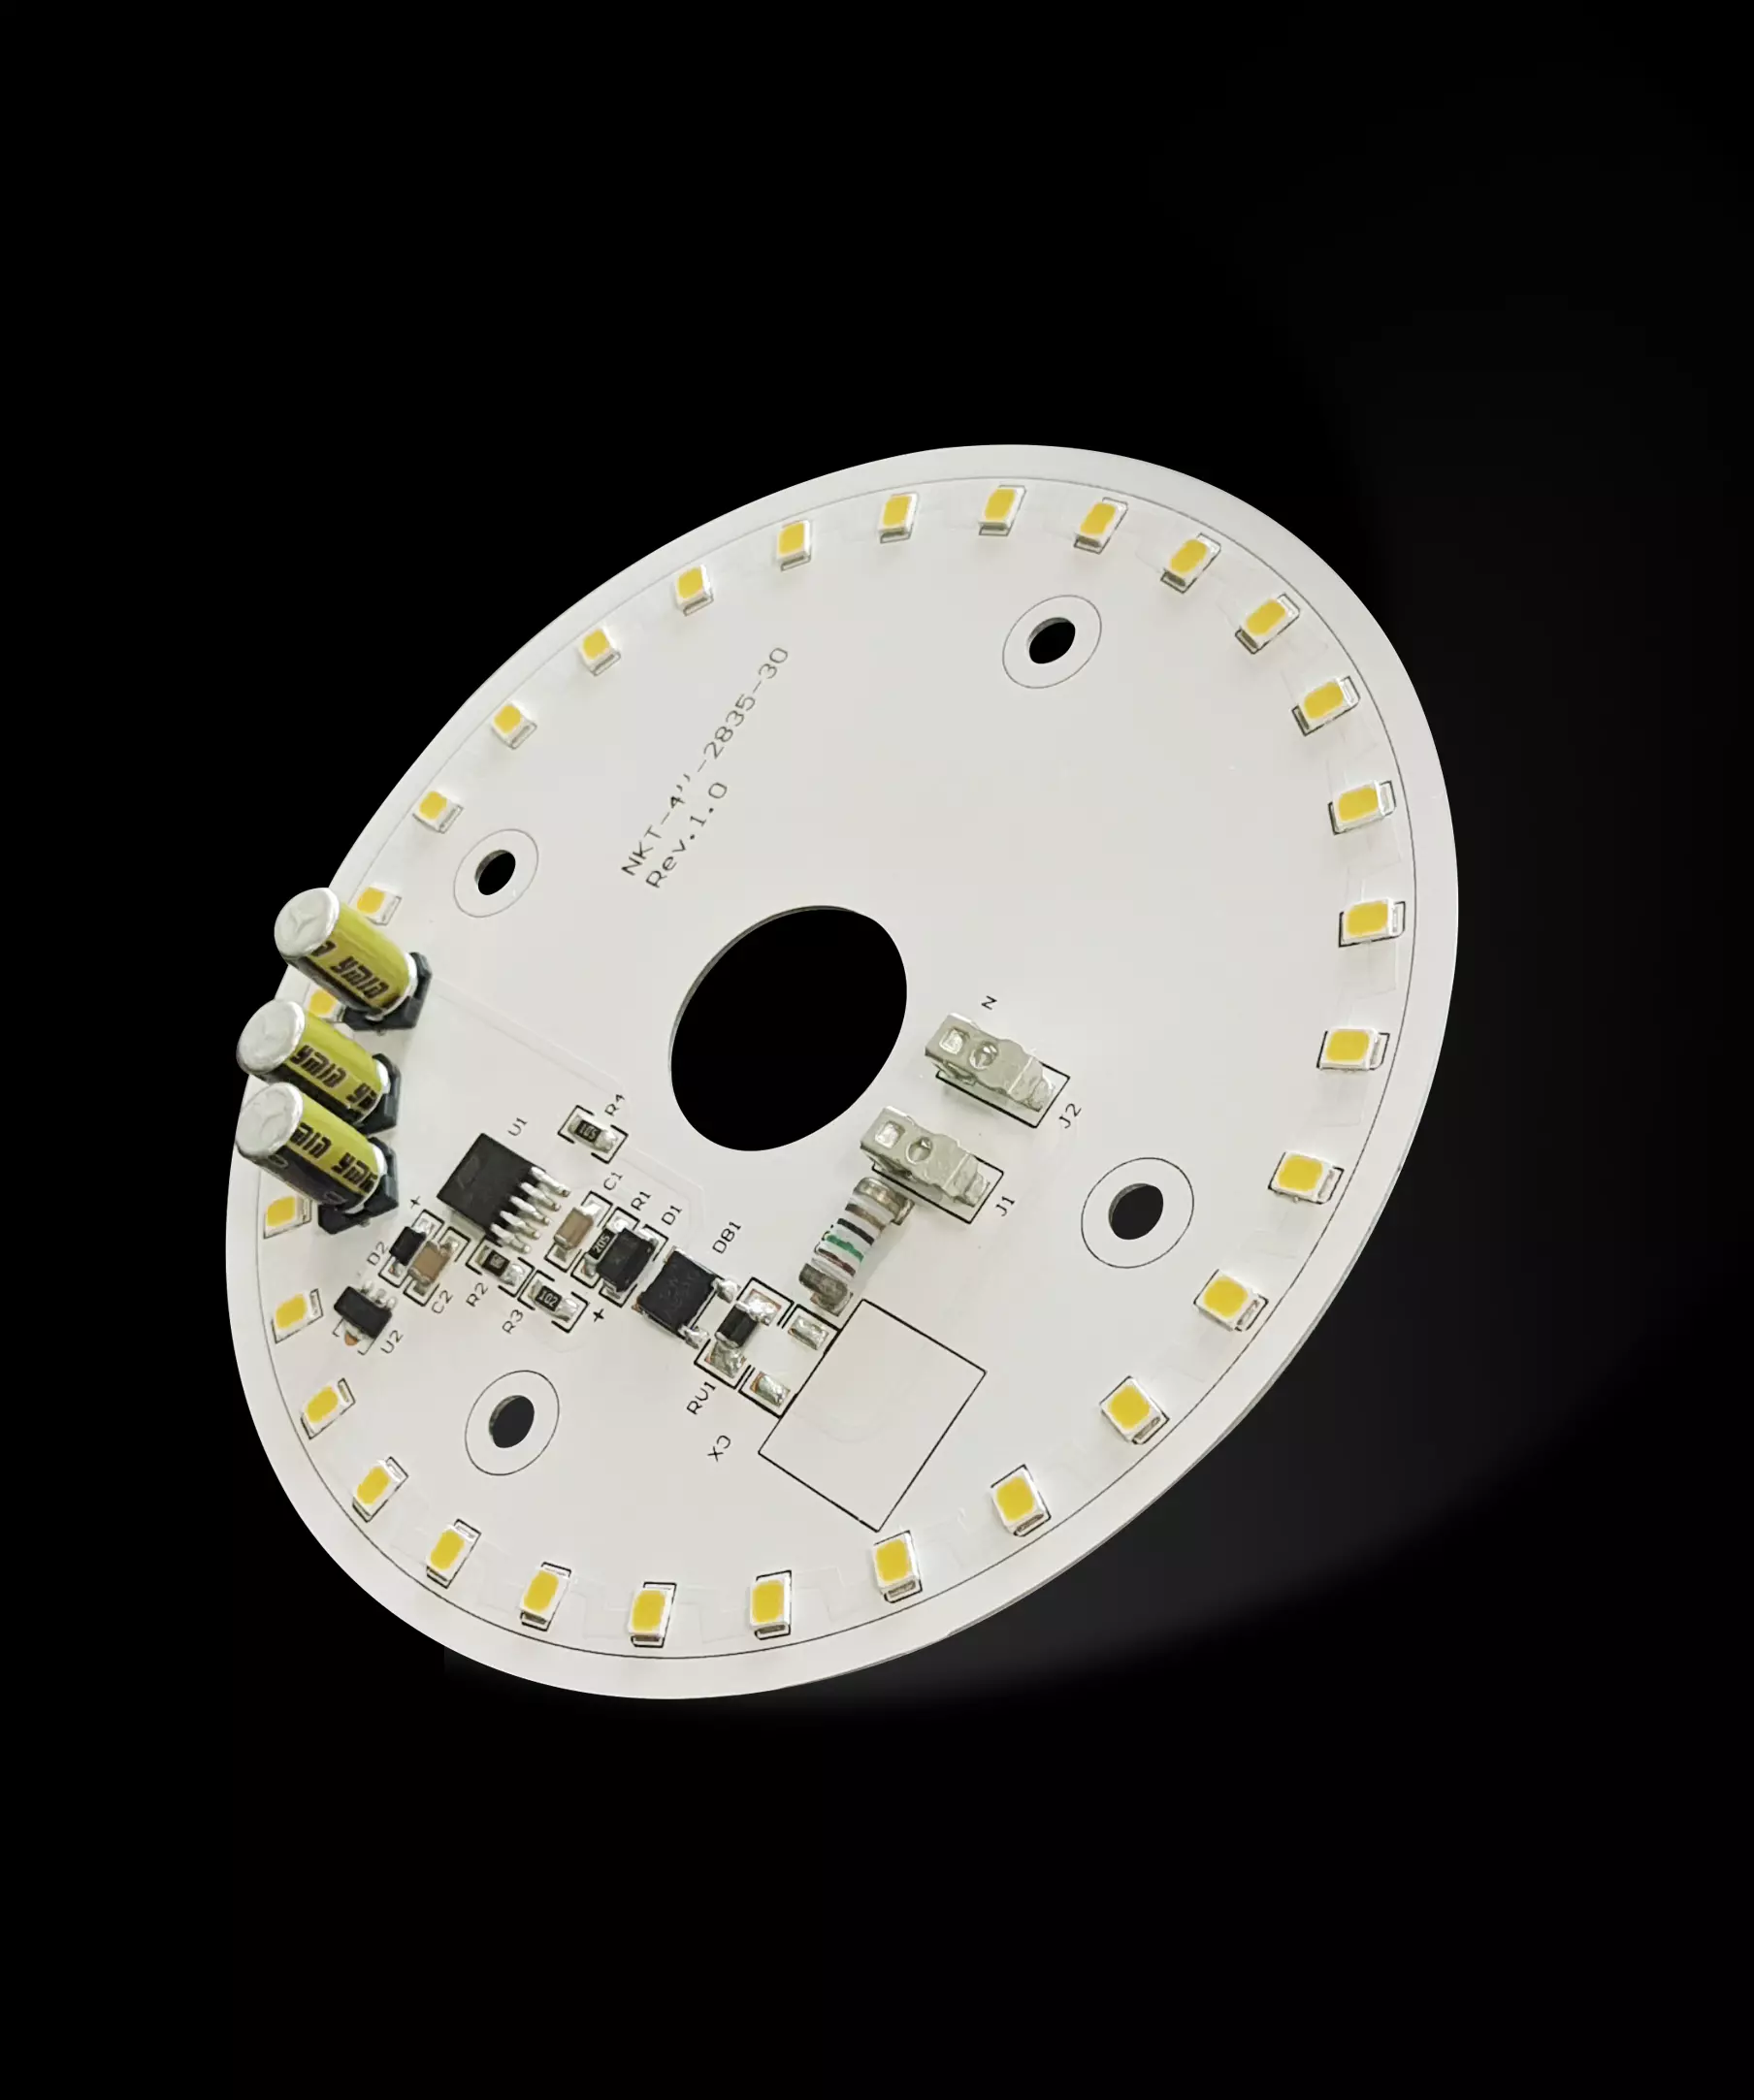 RoHs ceiling down light replacement light engine 220V AC 2835 SMD circular round dob modul pcb circuit board led module